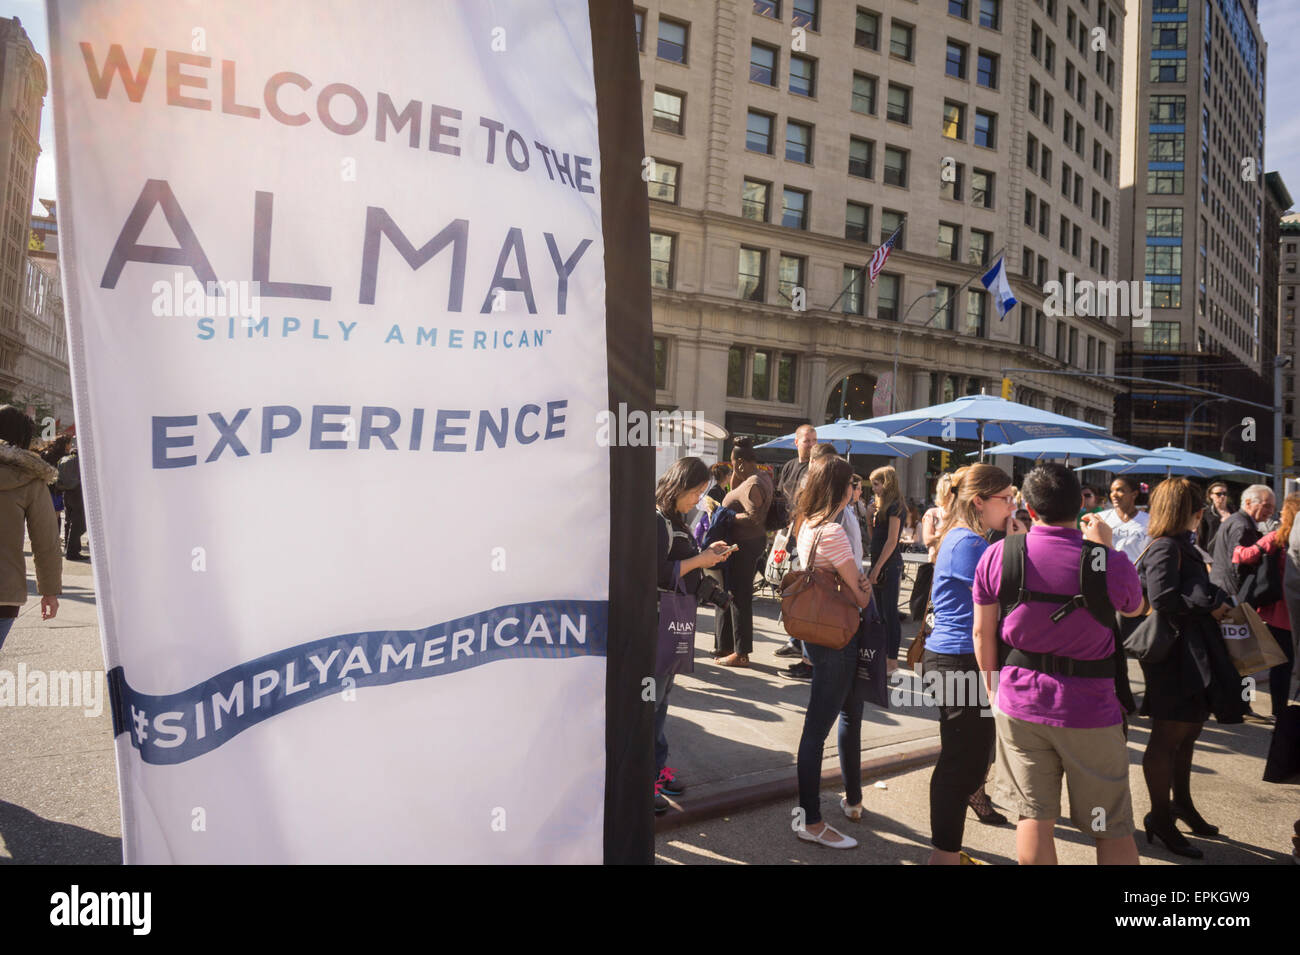 Hundreds of women turn out for the Almay Simply American branding event in Flatiron Plaza in New York on Friday, May 15, 2015. The beauty company gave away product samples, American food, and makeup touchups and with each social media post from the participants the company donated $1 to the USO. Alamy also gave $250,000 to the USO.  (© Richard B. Levine) Stock Photo